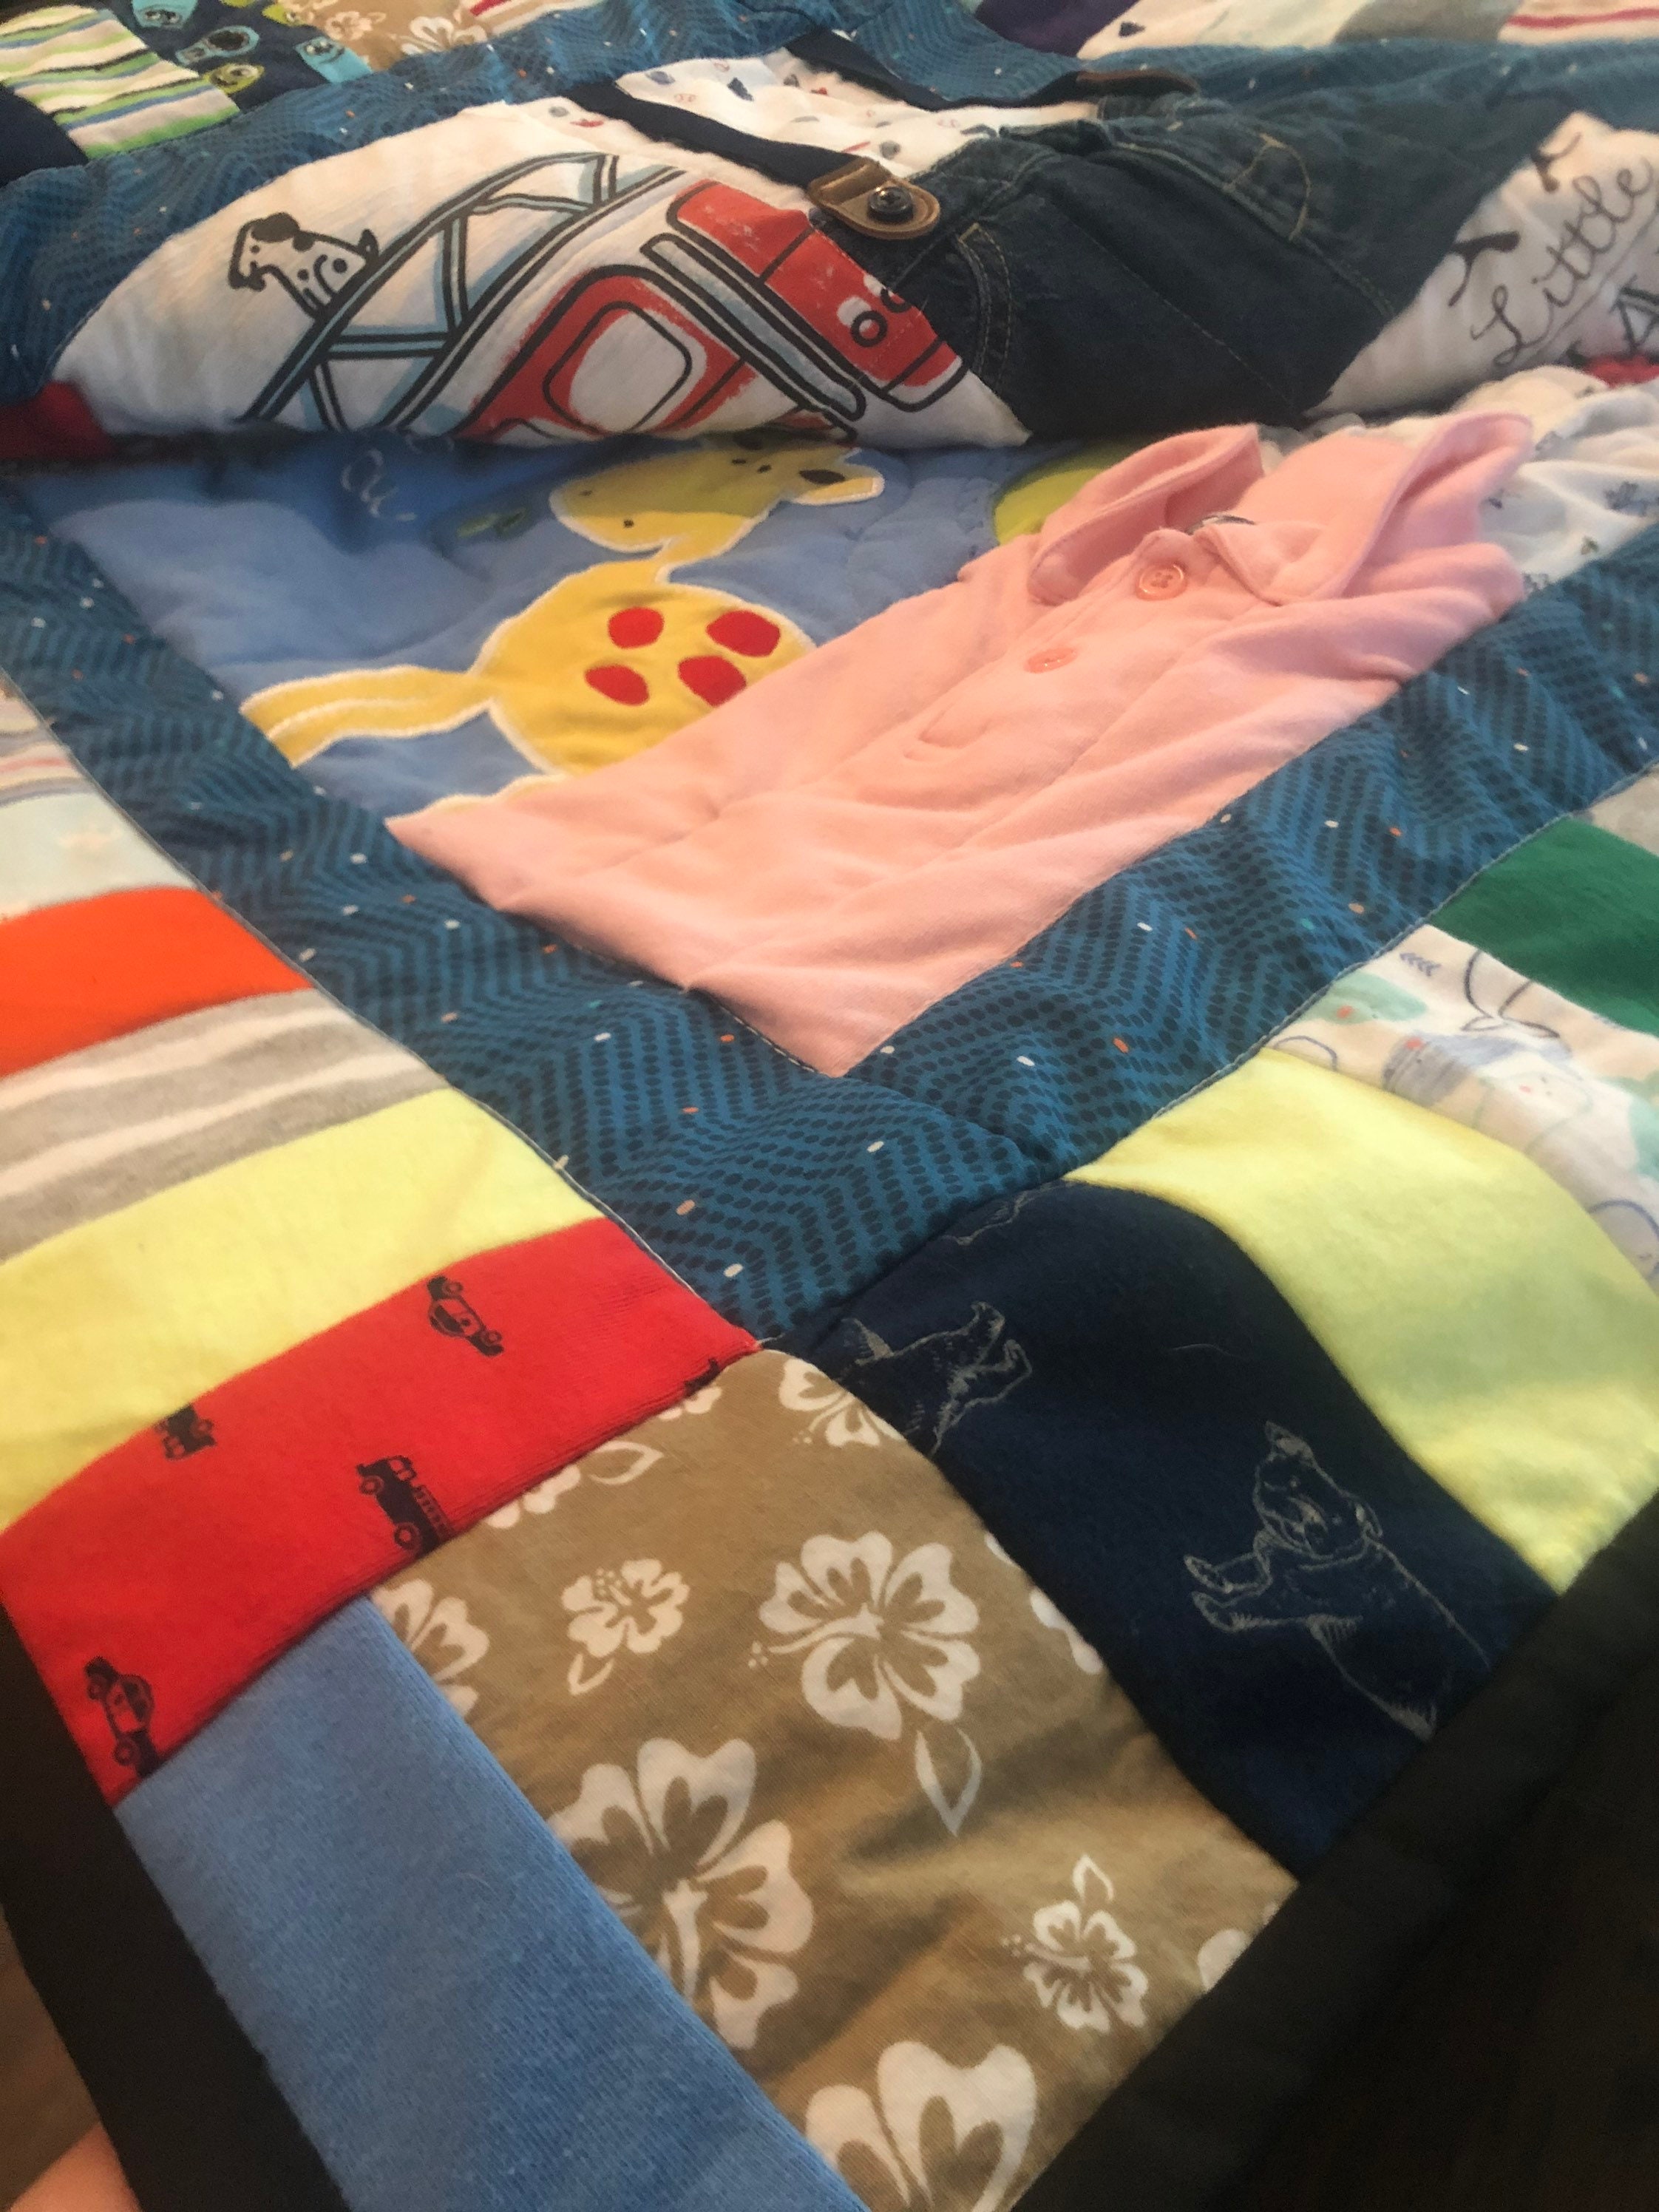 60+ Gifts for Quilters – The (not so) Dramatic Life